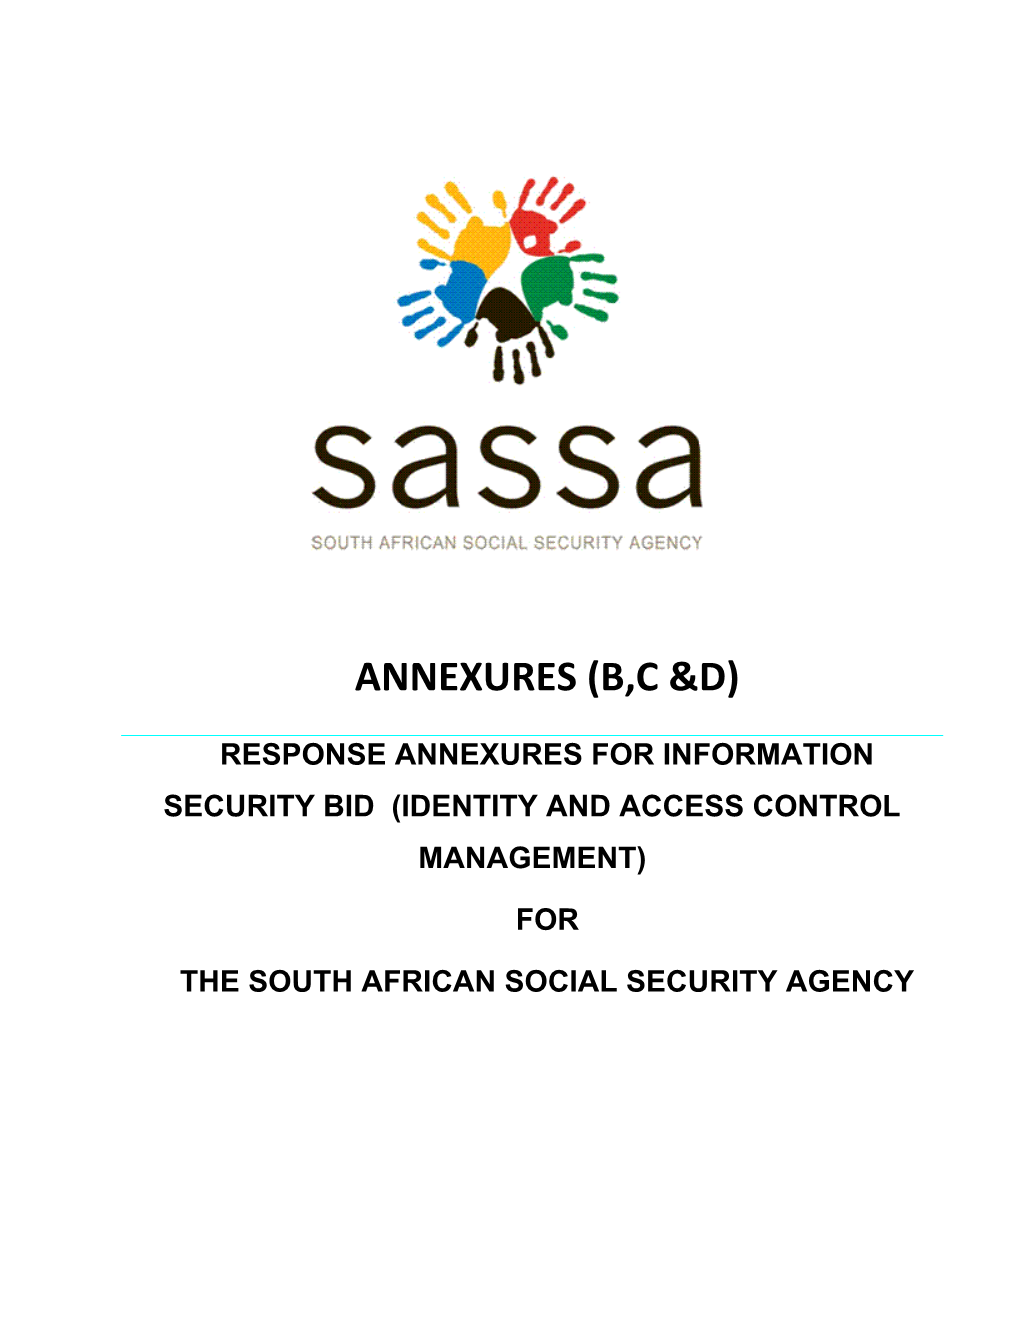 Response Annexures for Information Security Bid (Identity and Access Control Management)